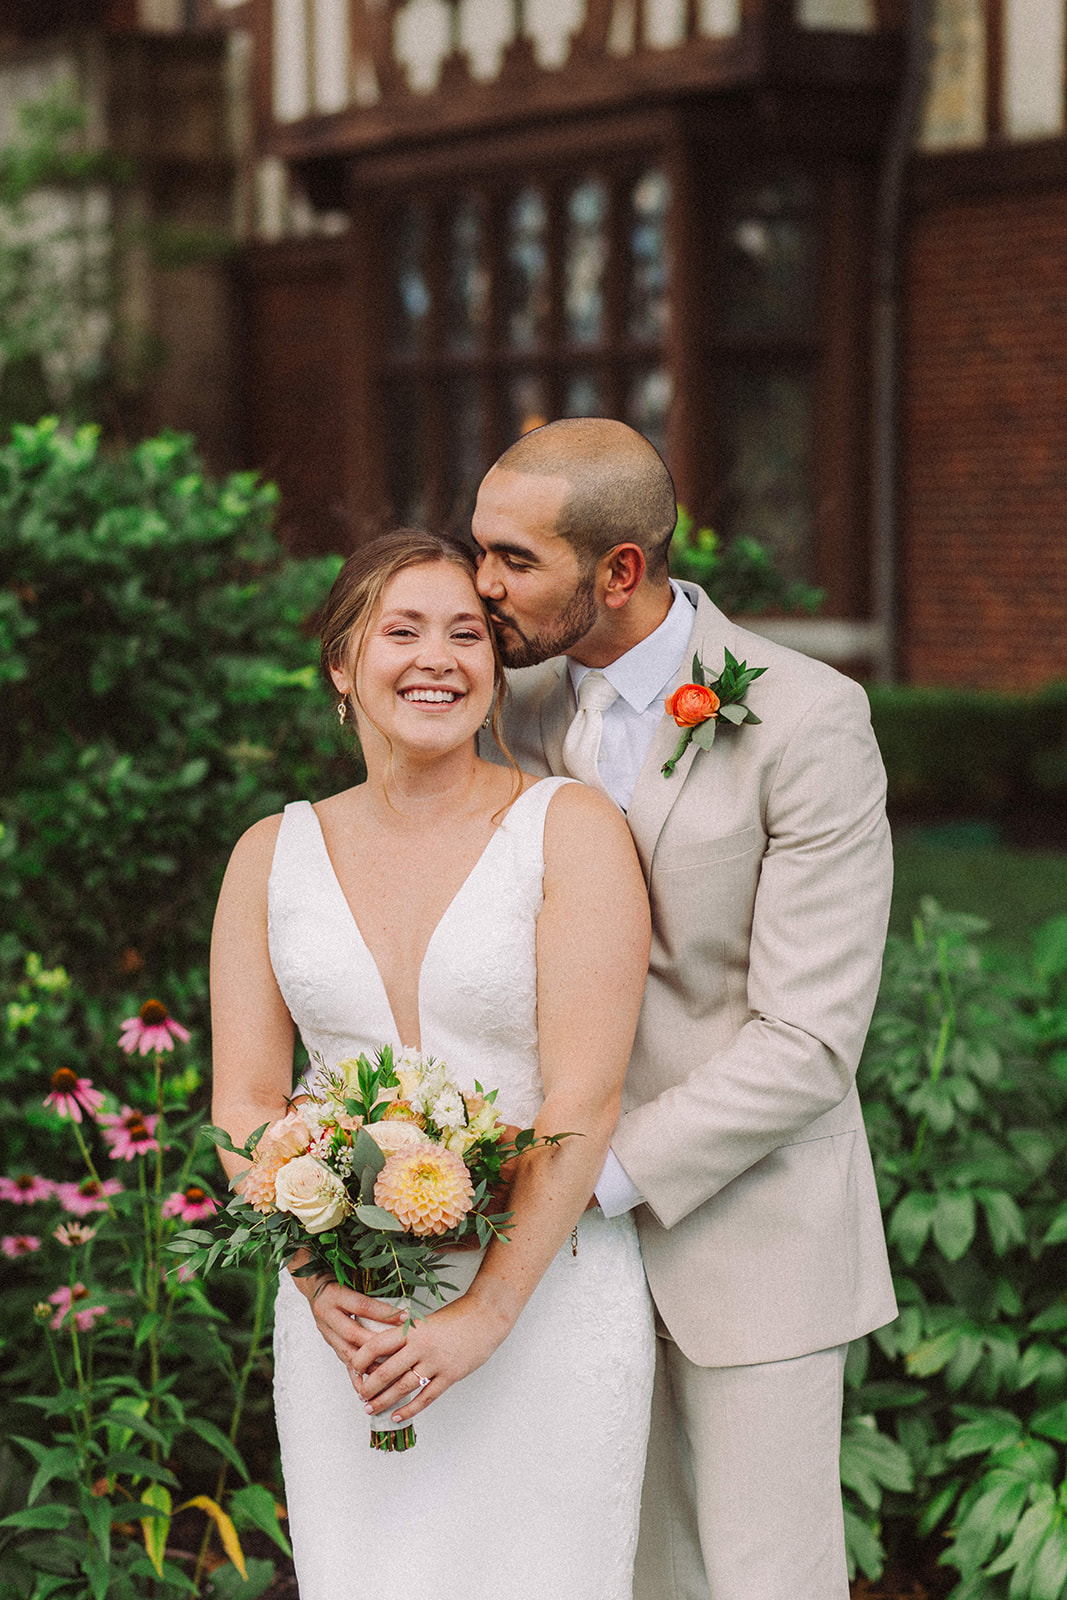 Timeless wedding portraits of a mixed race couple in lush greenery outside the Crosley Estate on a Summer day